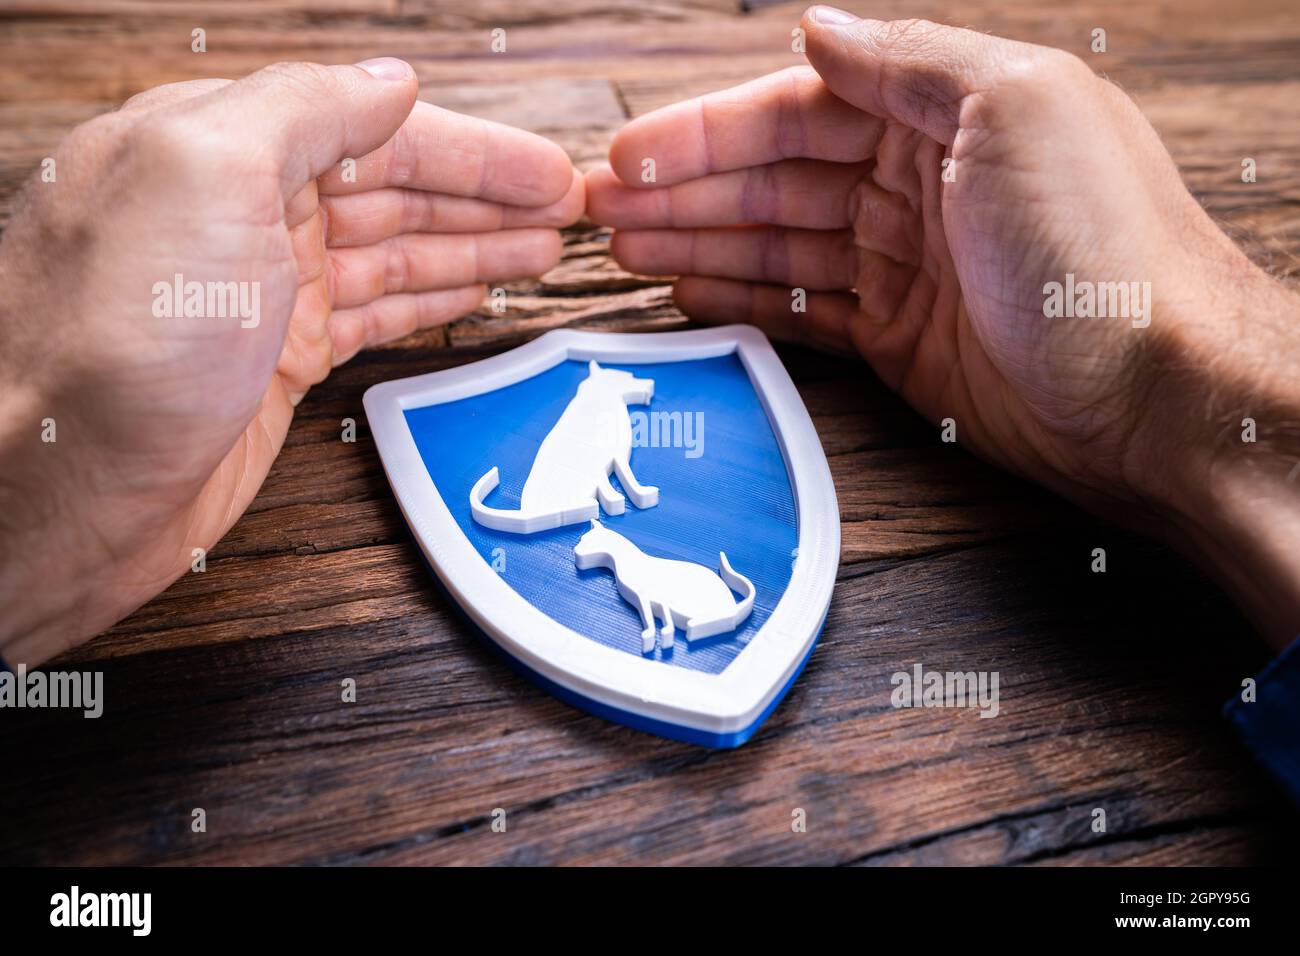 Pet Insurance Concept. Liabilities And Cost Safety Stock Photo